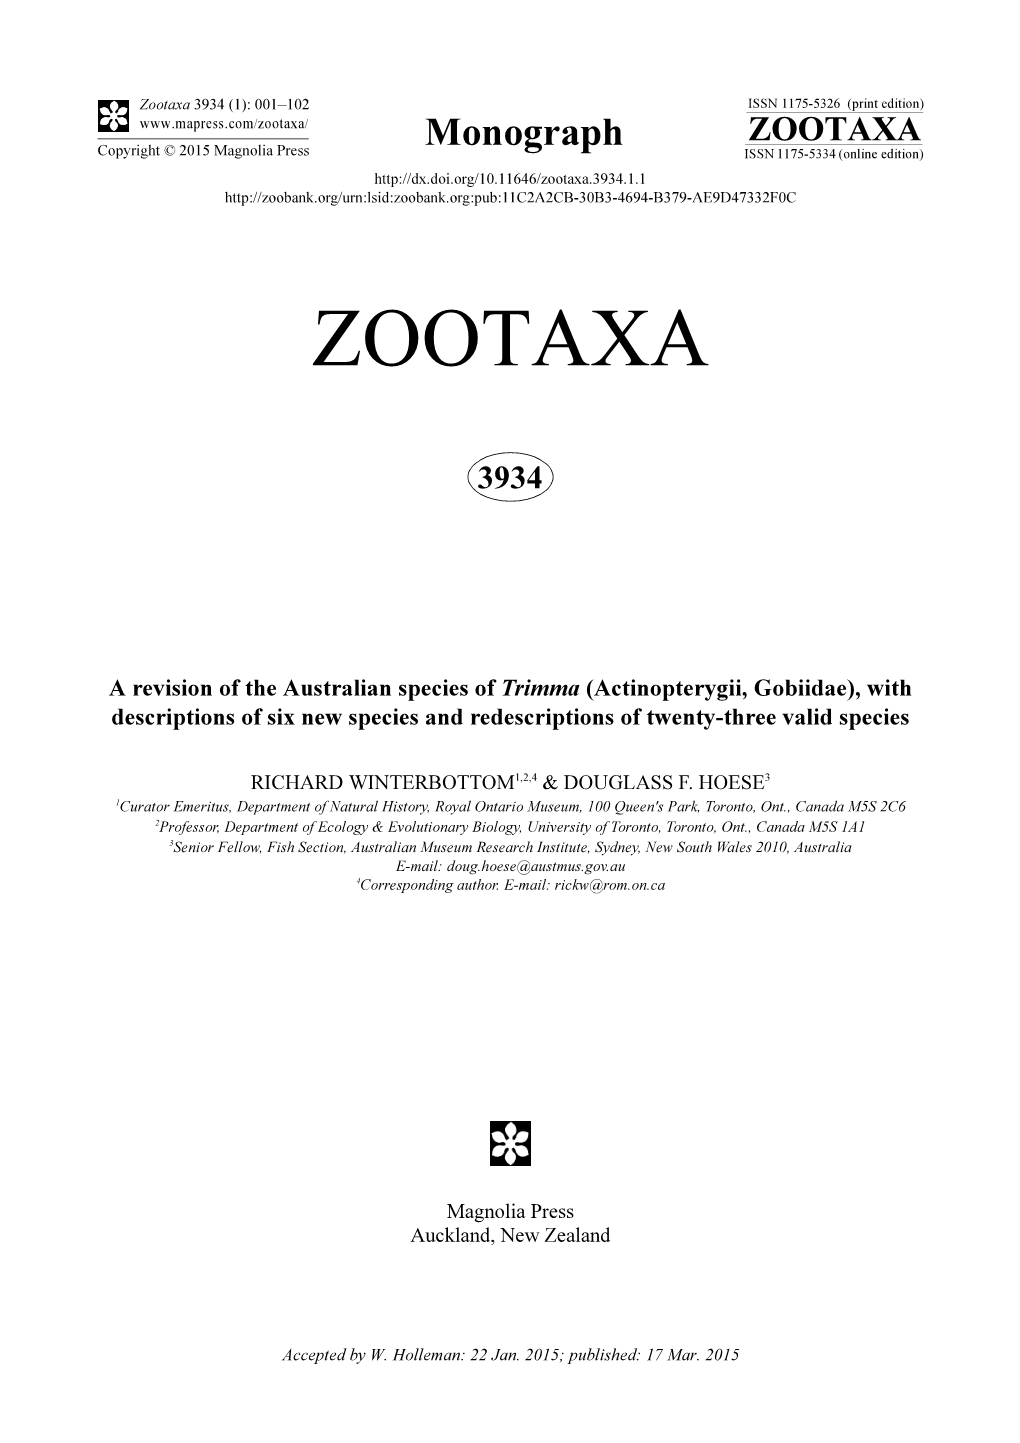 A Revision of the Australian Species of Trimma (Actinopterygii, Gobiidae), with Descriptions of Six New Species and Redescriptions of Twenty-Three Valid Species